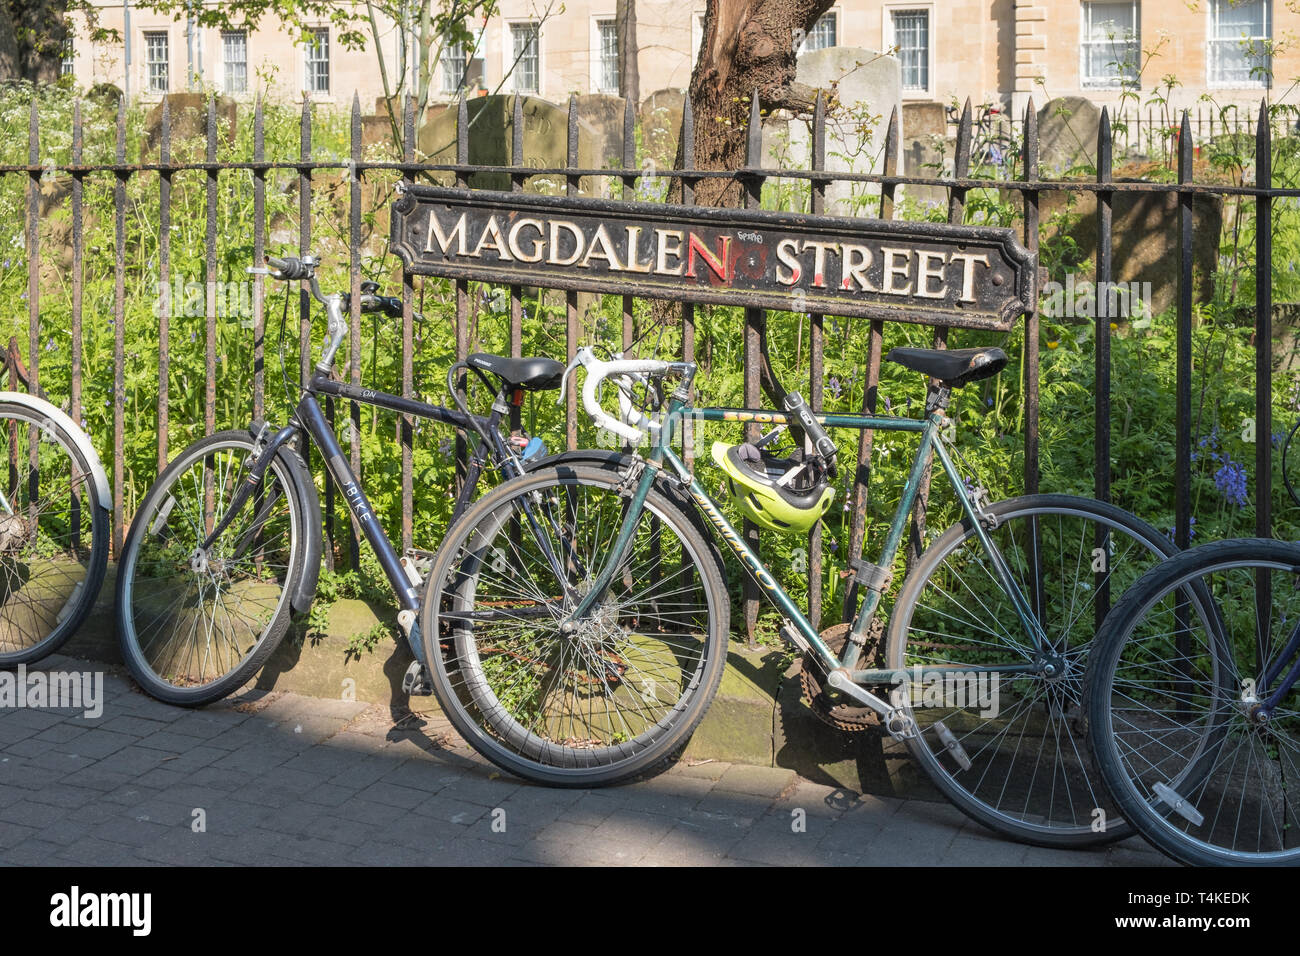 Bicycles attached to railings in Magdalen Street, Oxford, UK Stock Photo